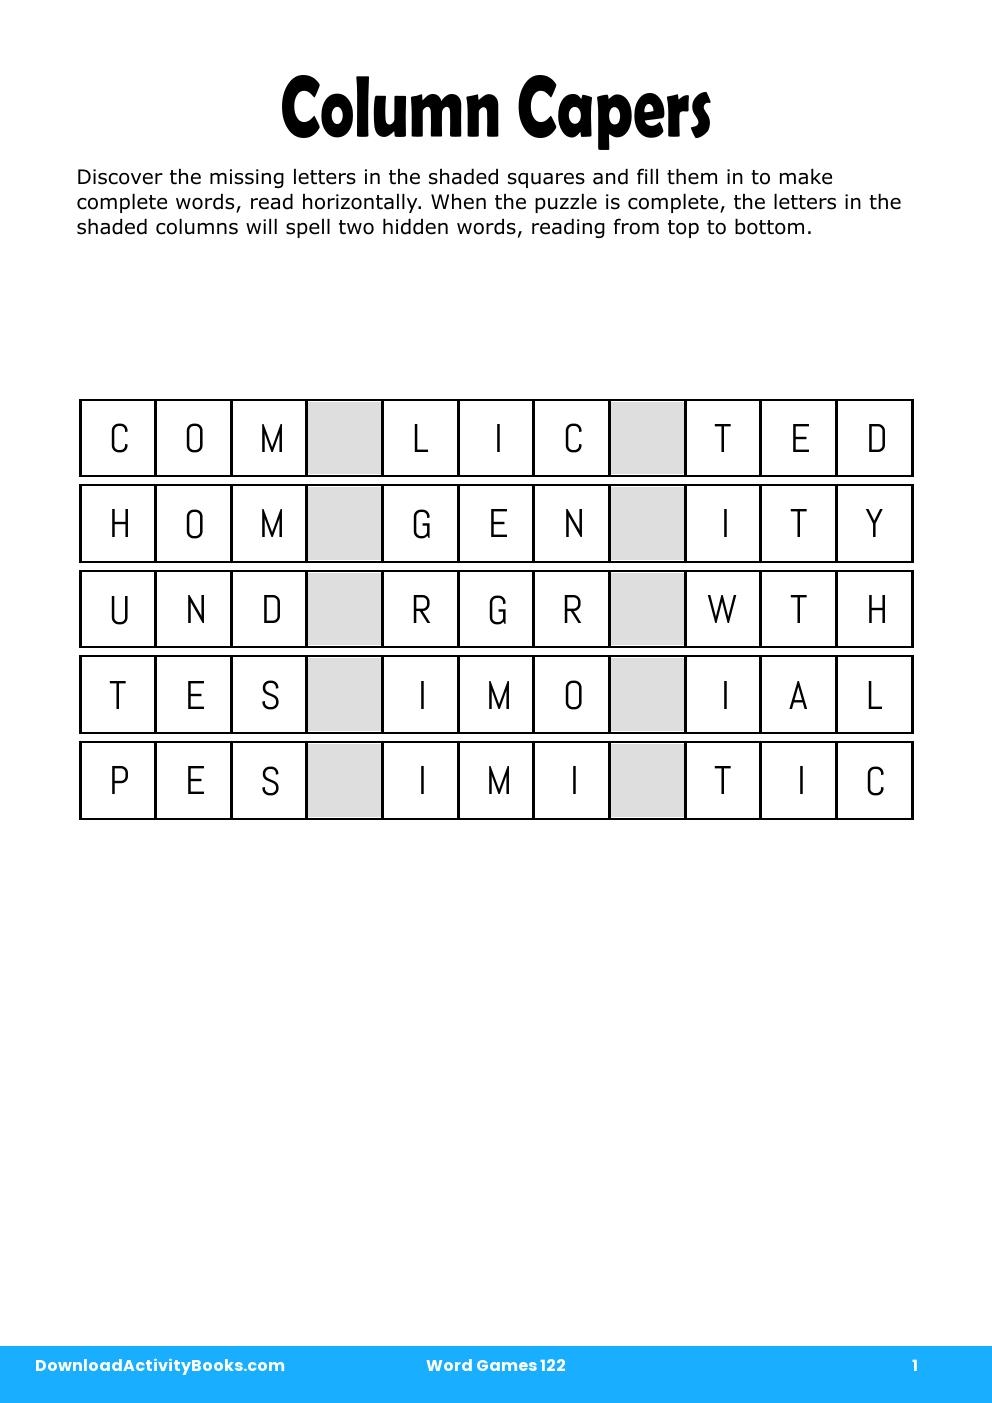 Column Capers in Word Games 122